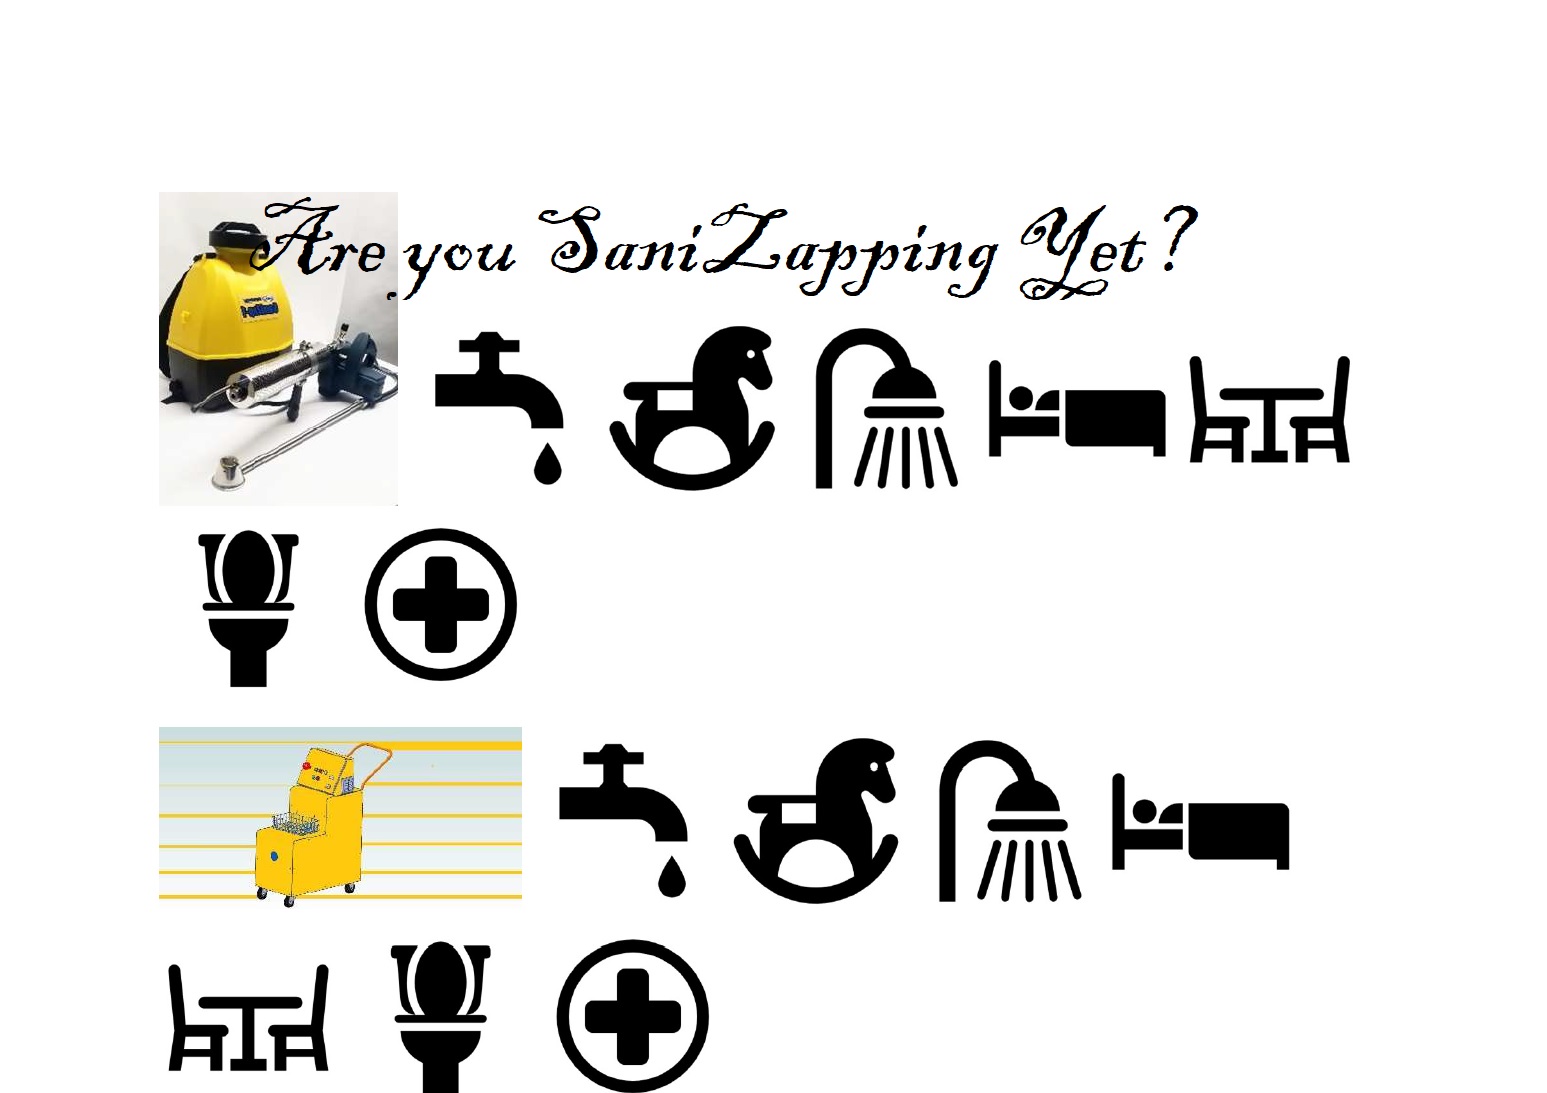 Are you SaniZapping Yet?